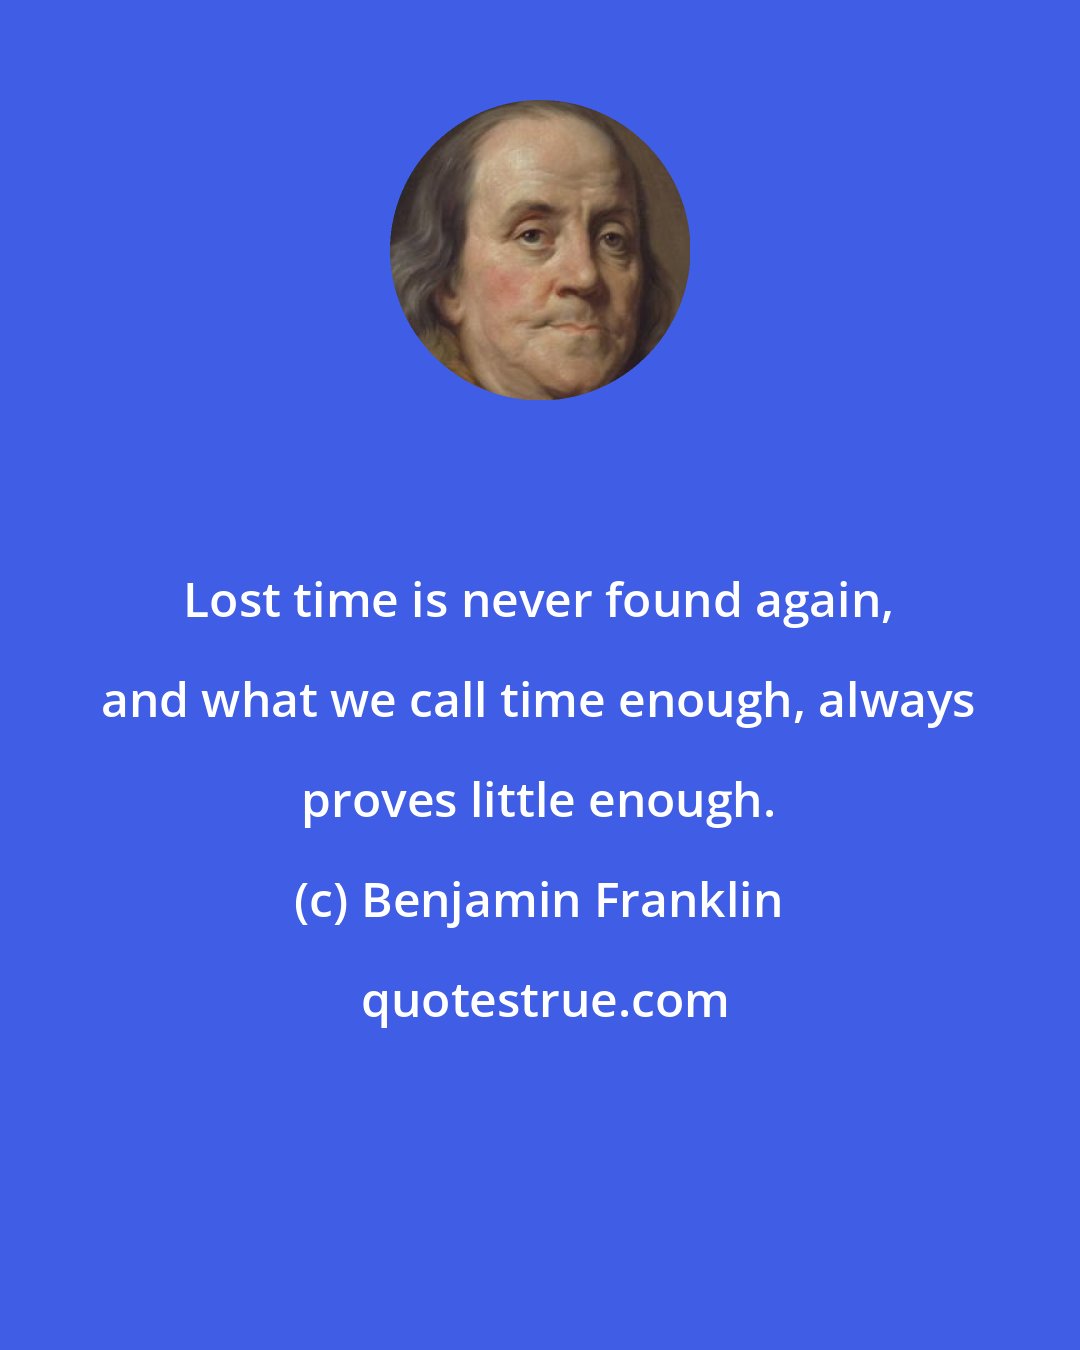 Benjamin Franklin: Lost time is never found again, and what we call time enough, always proves little enough.